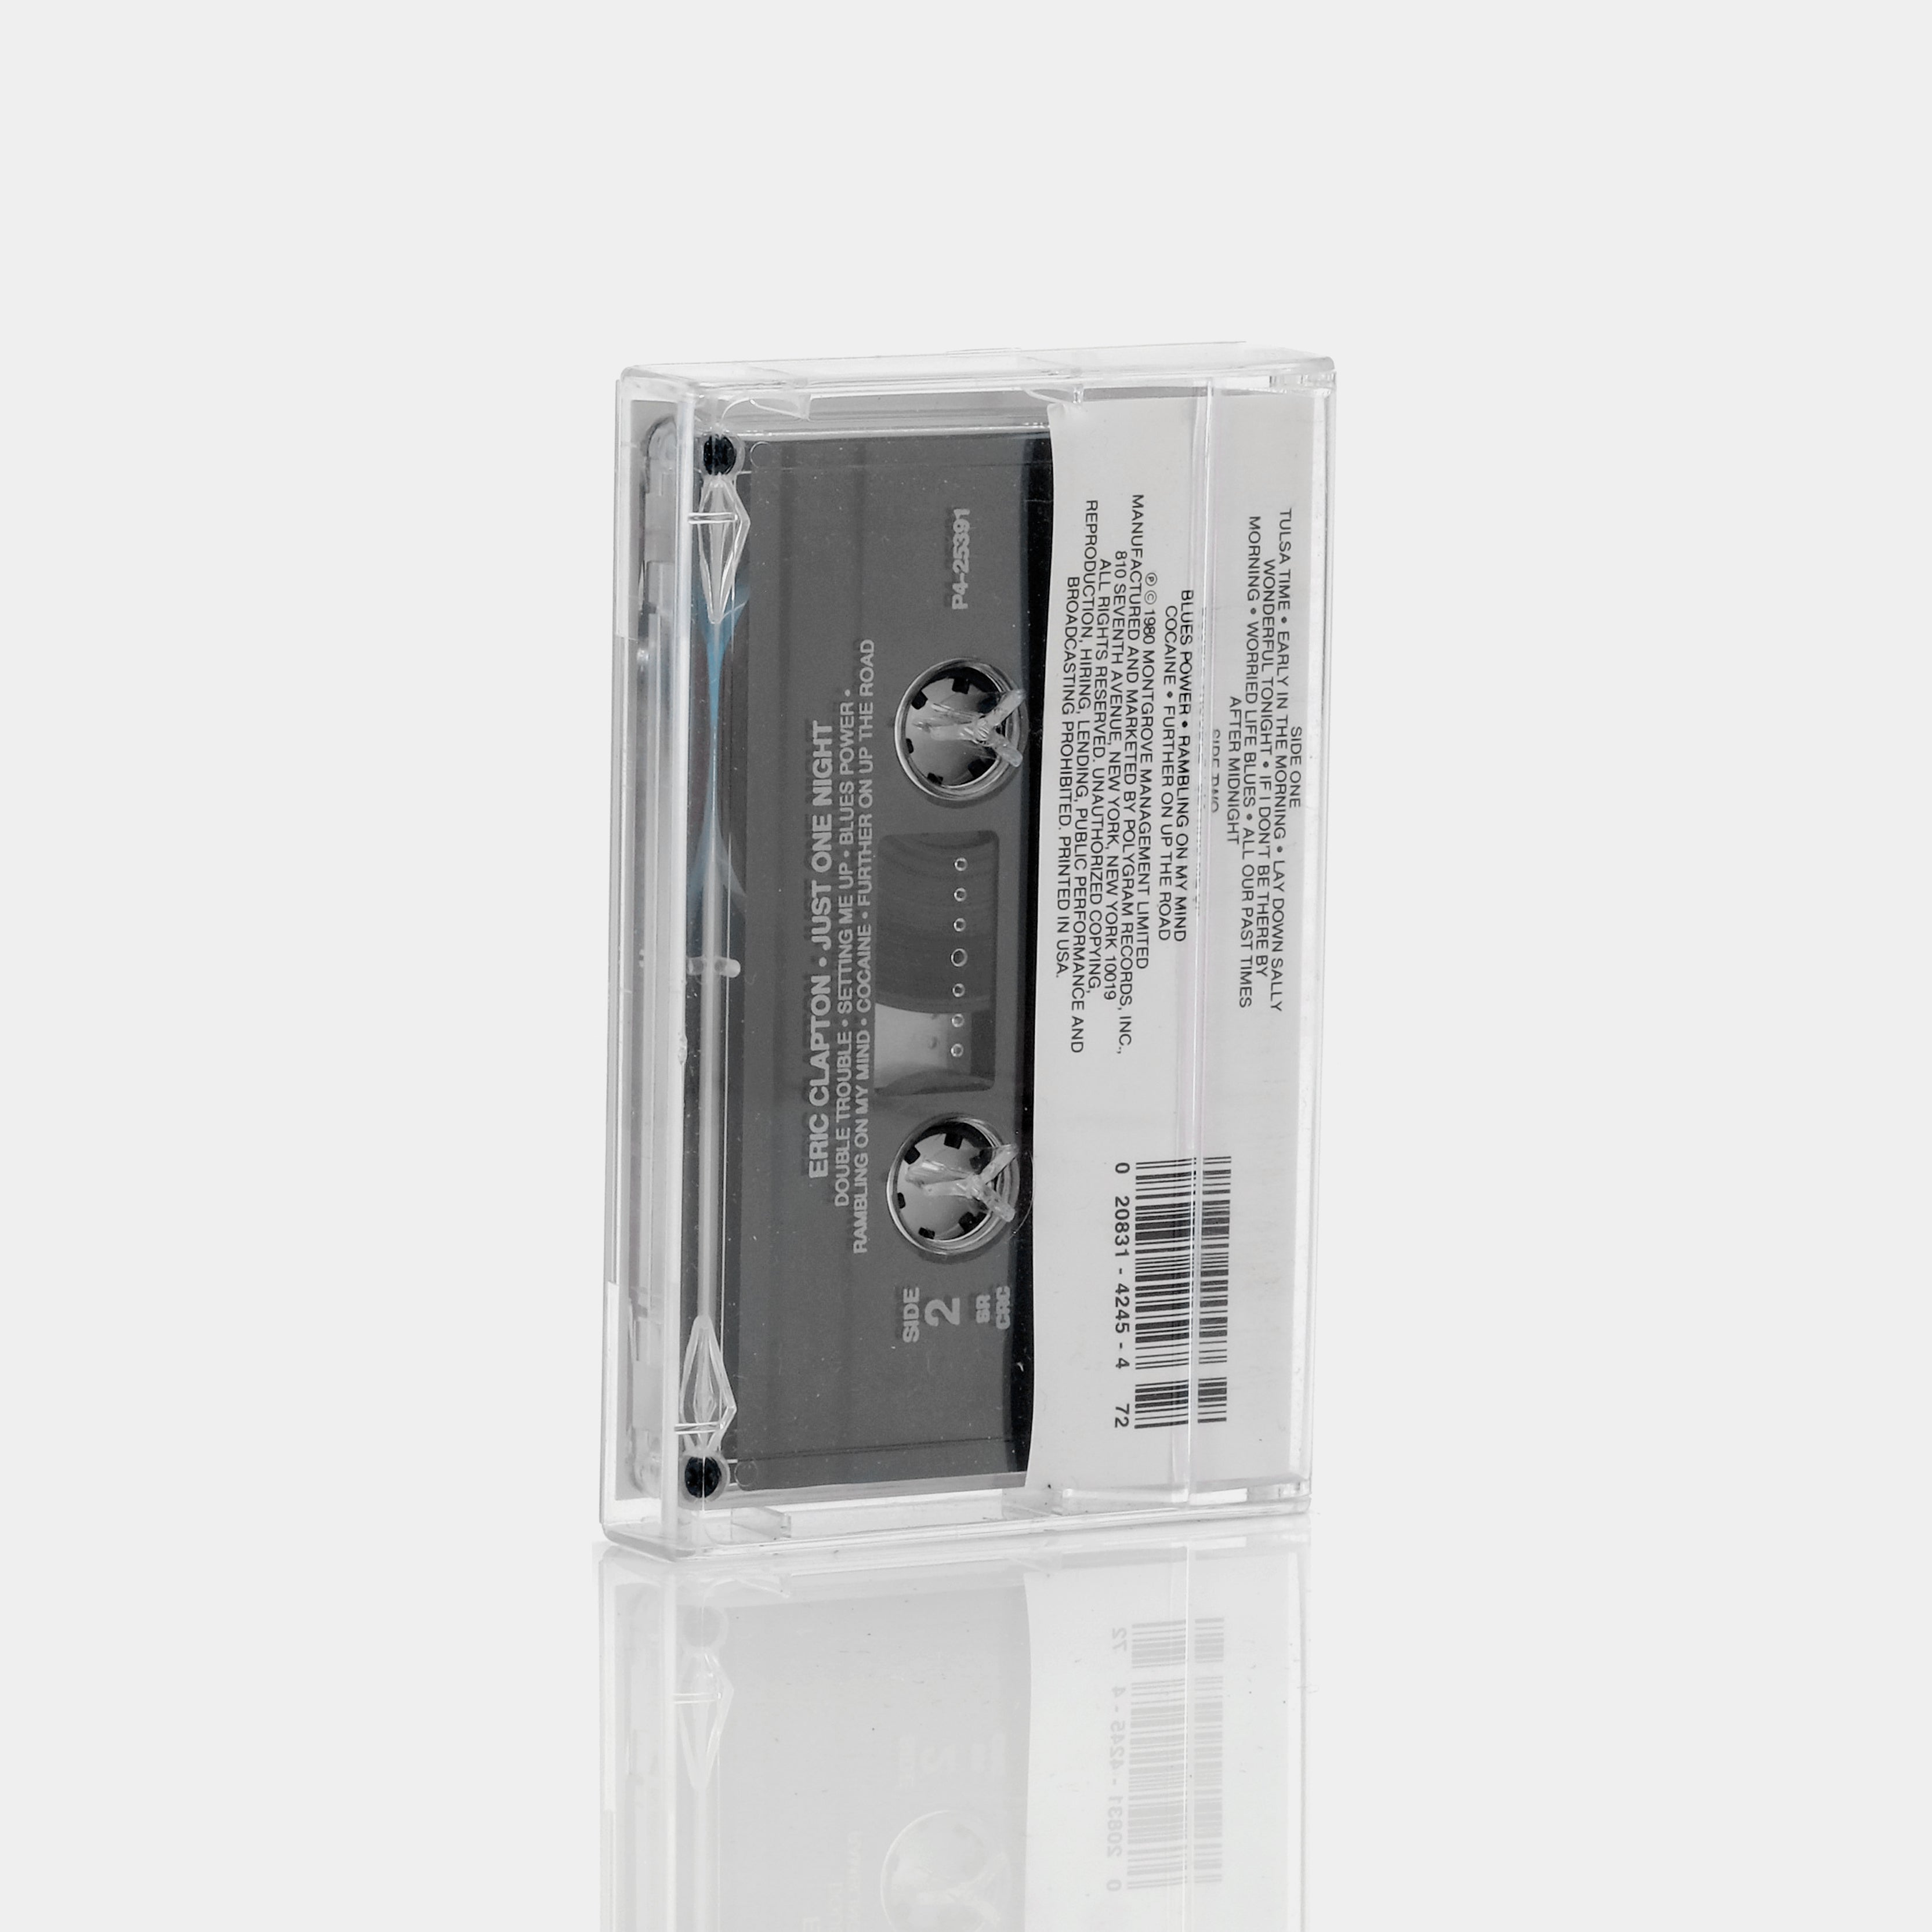 Eric Clapton - Just One Night Cassette Tape